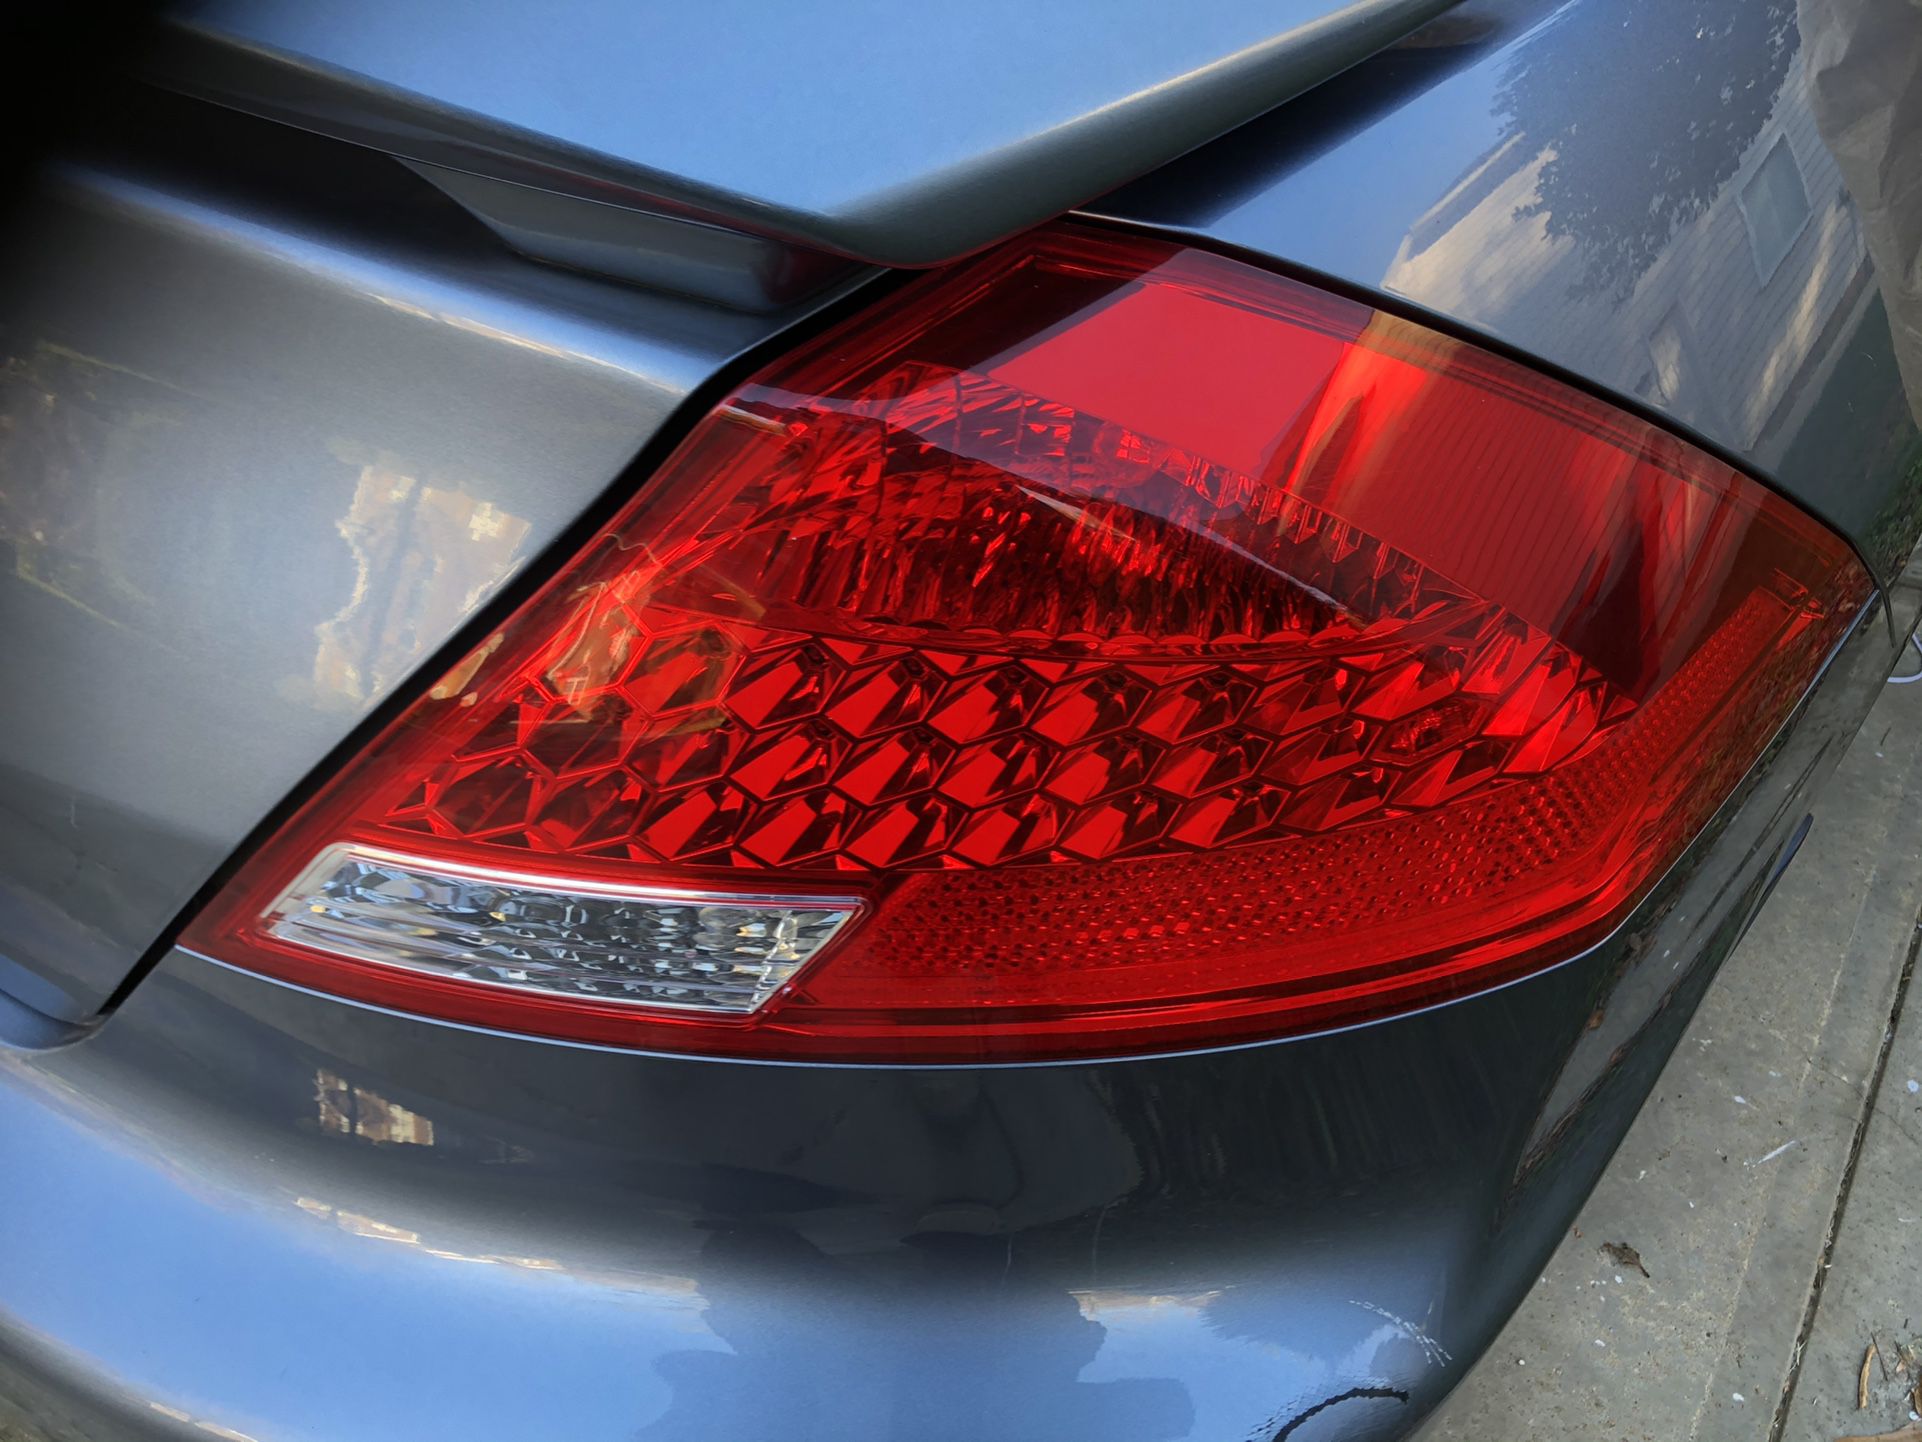 06 Honda Civic Coupe Oem Factory Taillights $100 No Less